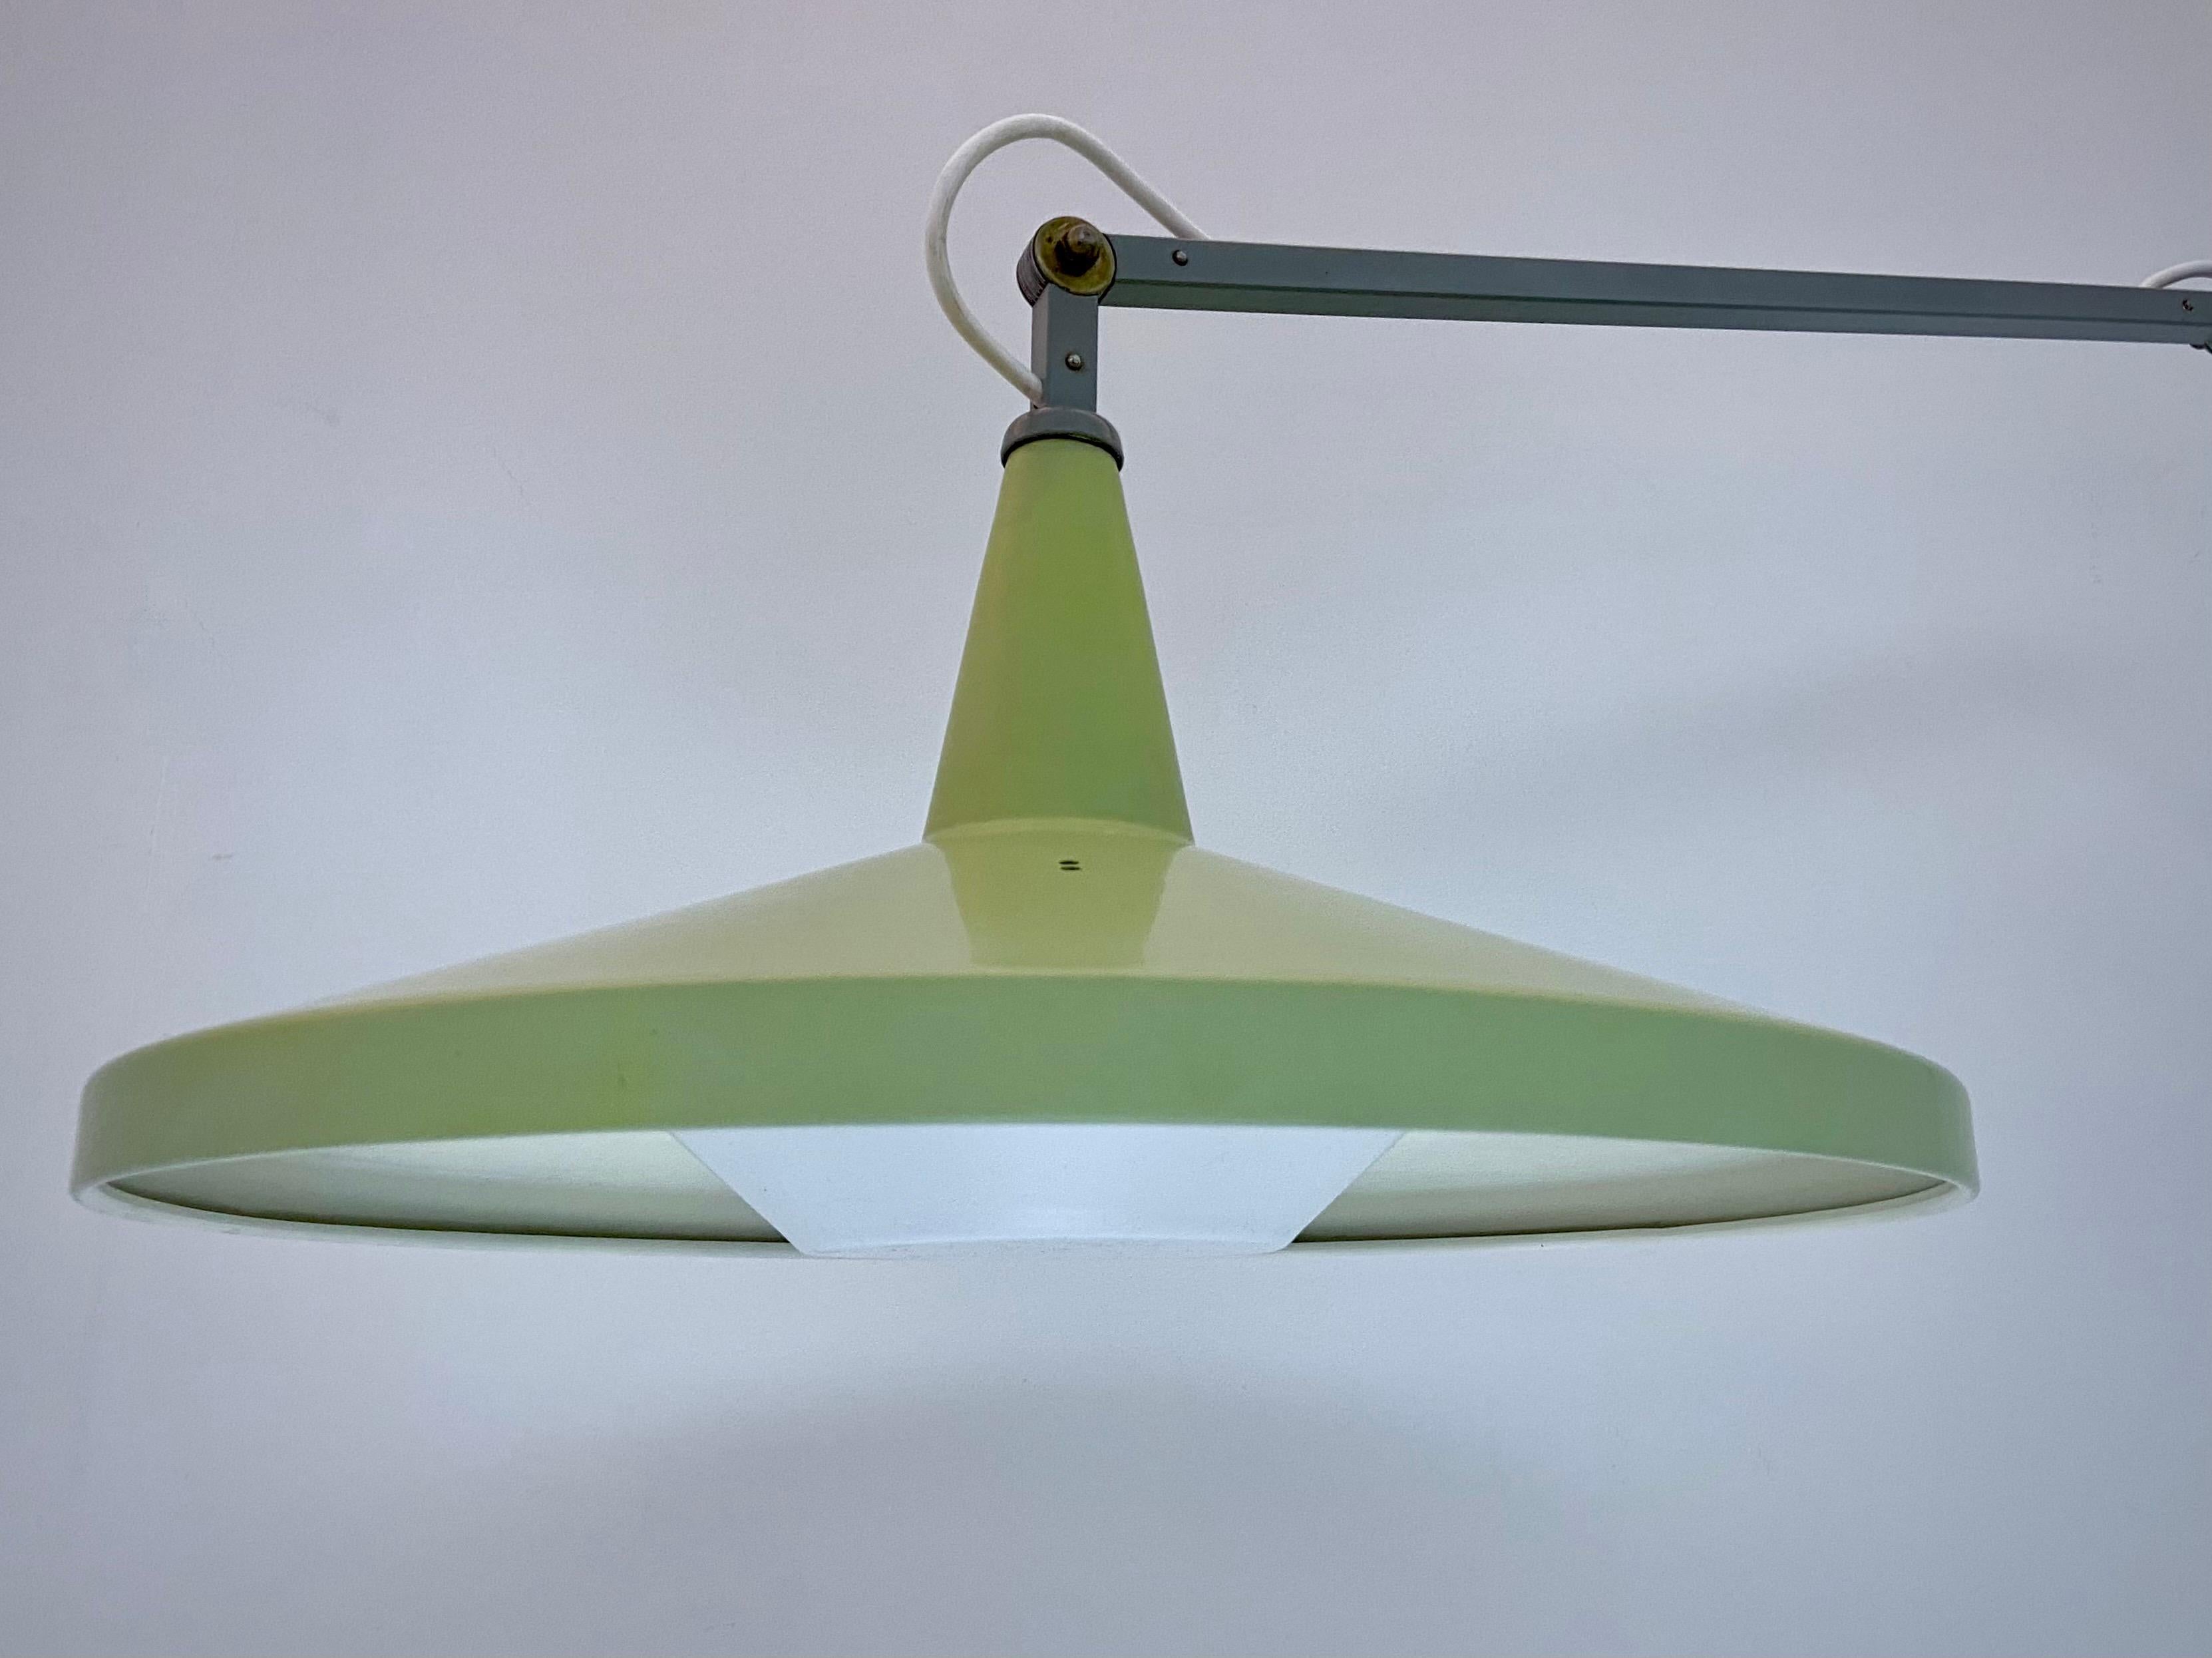 What makes this 'Panama' Lamp by Wim Rietveld so unique is that it is in a perfect original condition. The shade is still in the original lime green colour and has no dents or scratches. The diffuser is original too but for the picture we used a new